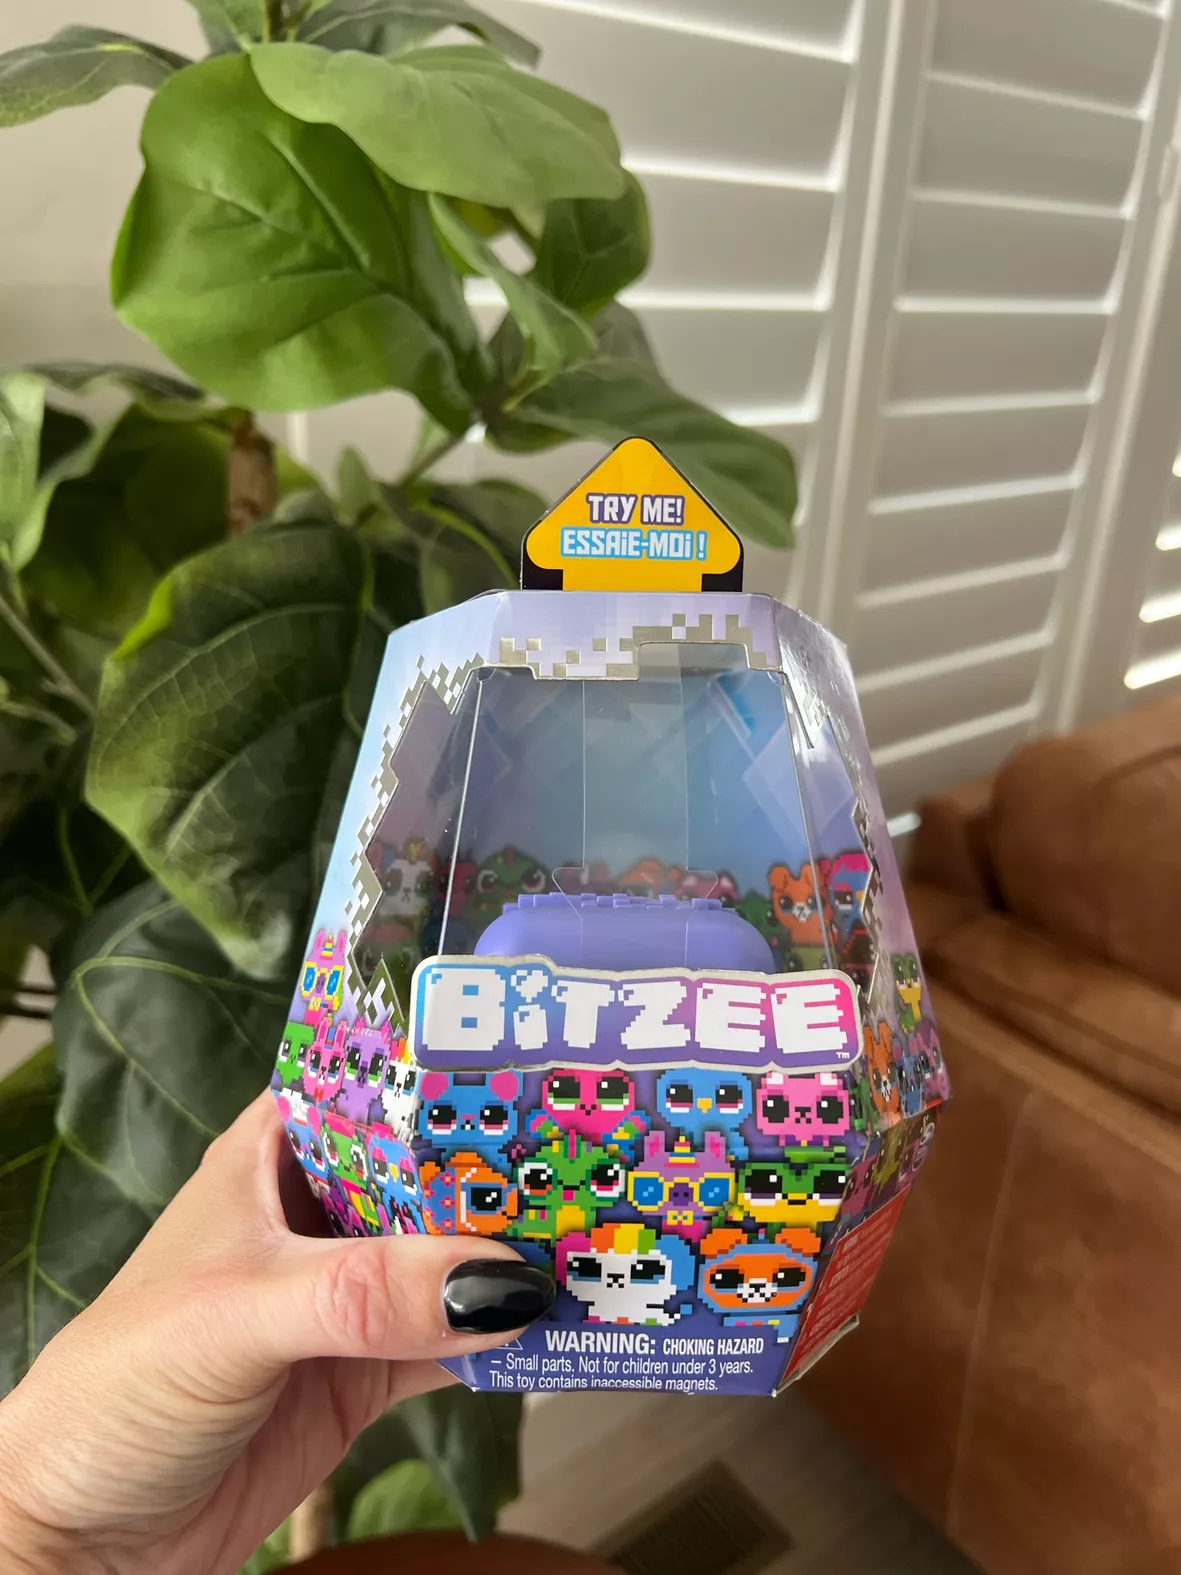 Bitzee, Interactive Digital Pet with 15 Electronic Pets Inside